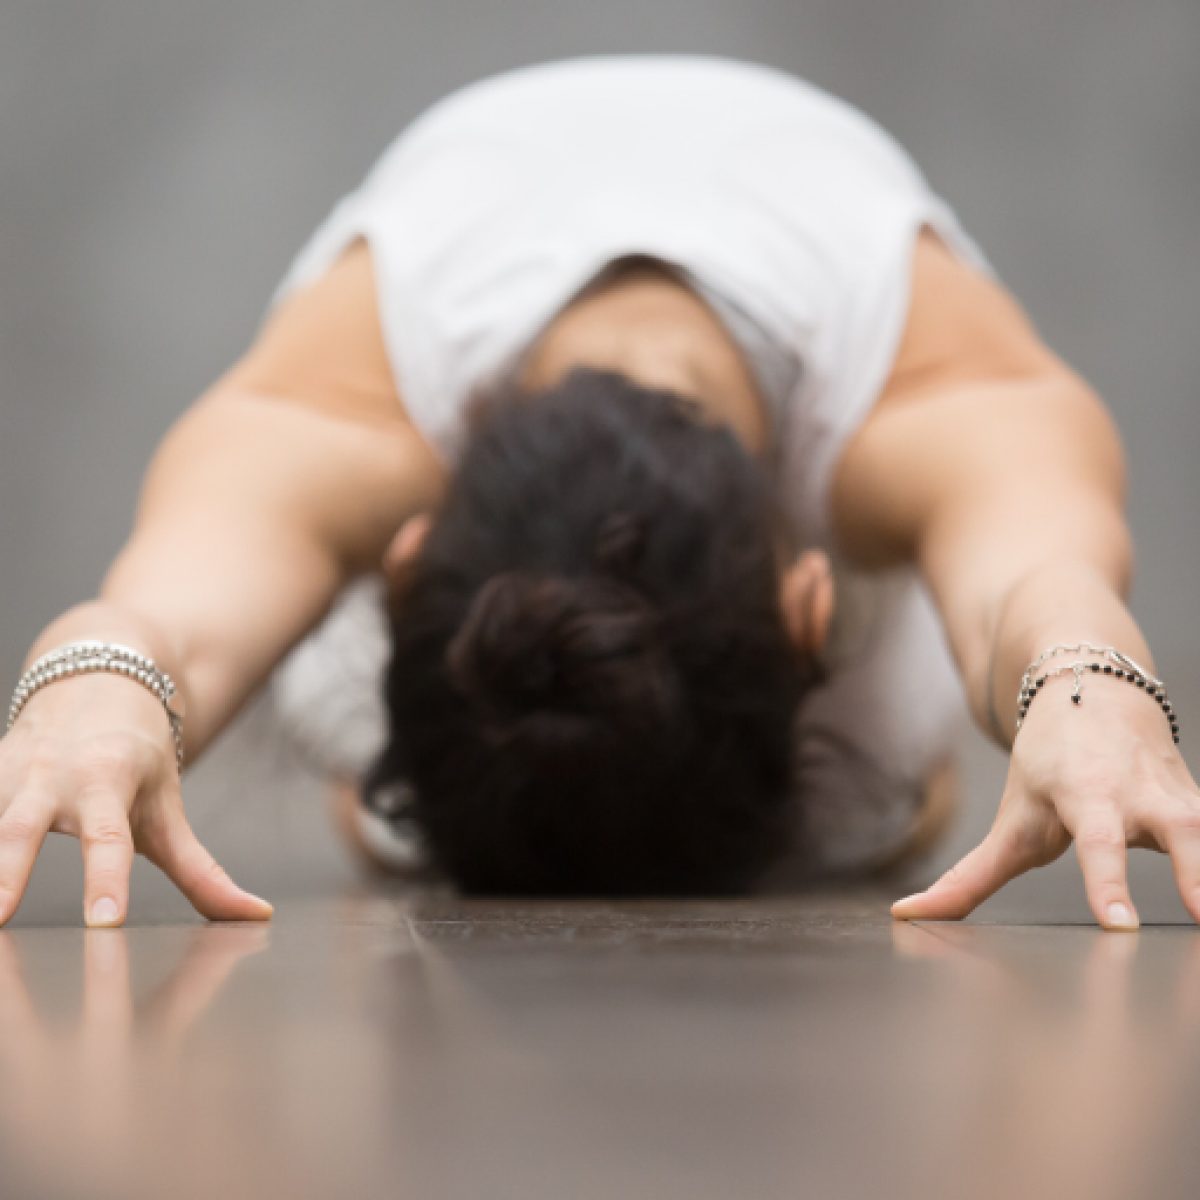 Yoga for kidney: 4 poses to avoid kidney problems | HealthShots